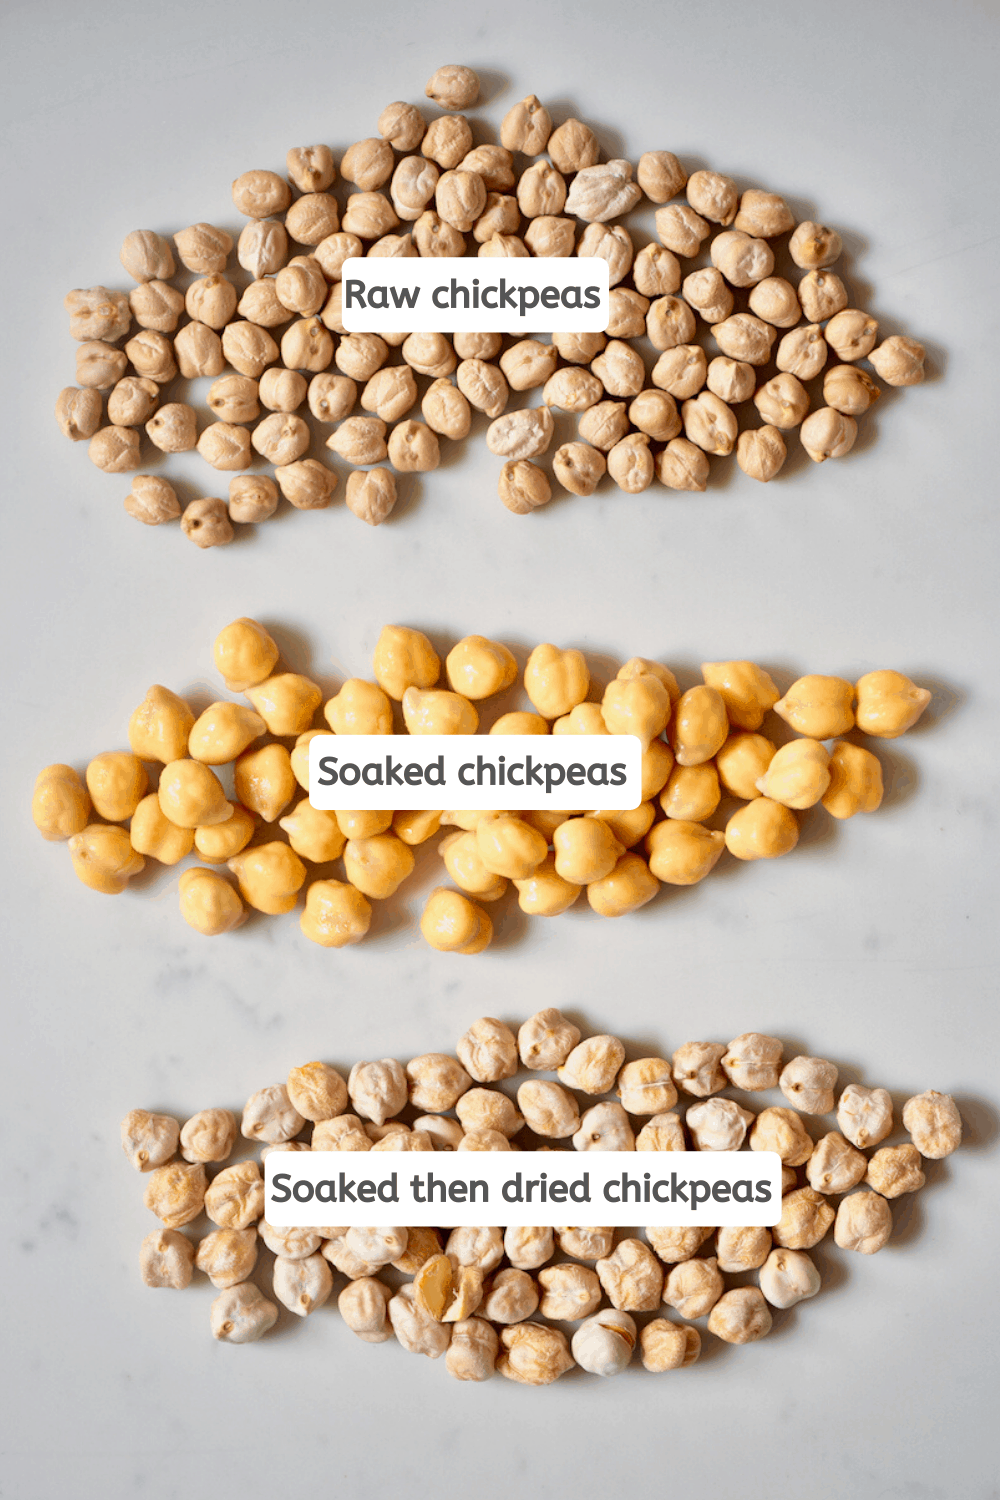 raw, soaked and soaked then dried chickpeas